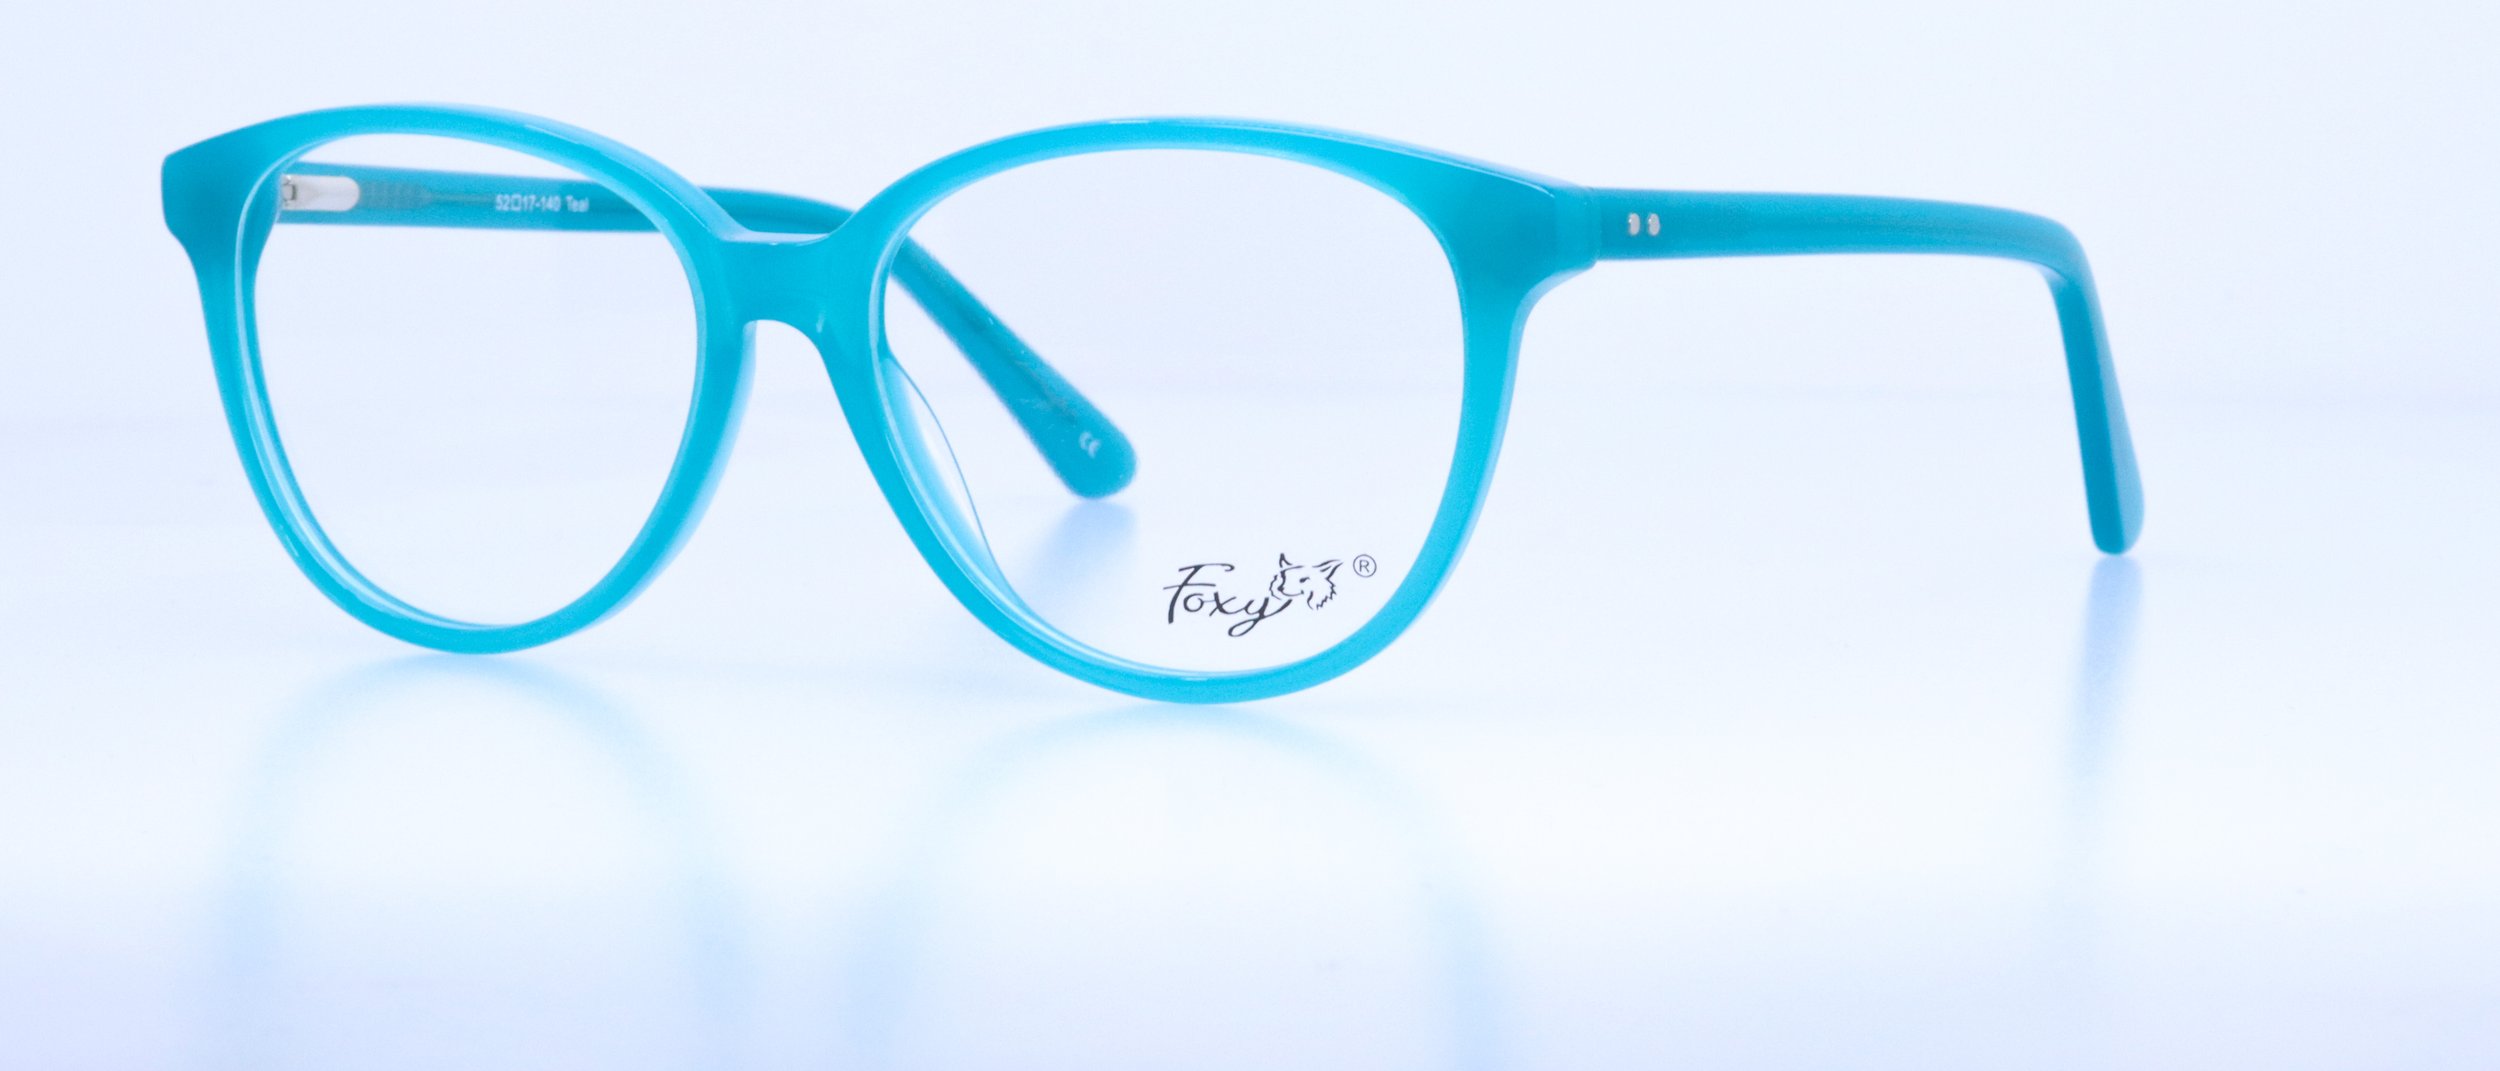  NEW!! Maddieboo: 52-17-140, Available in Magenta or Teal 